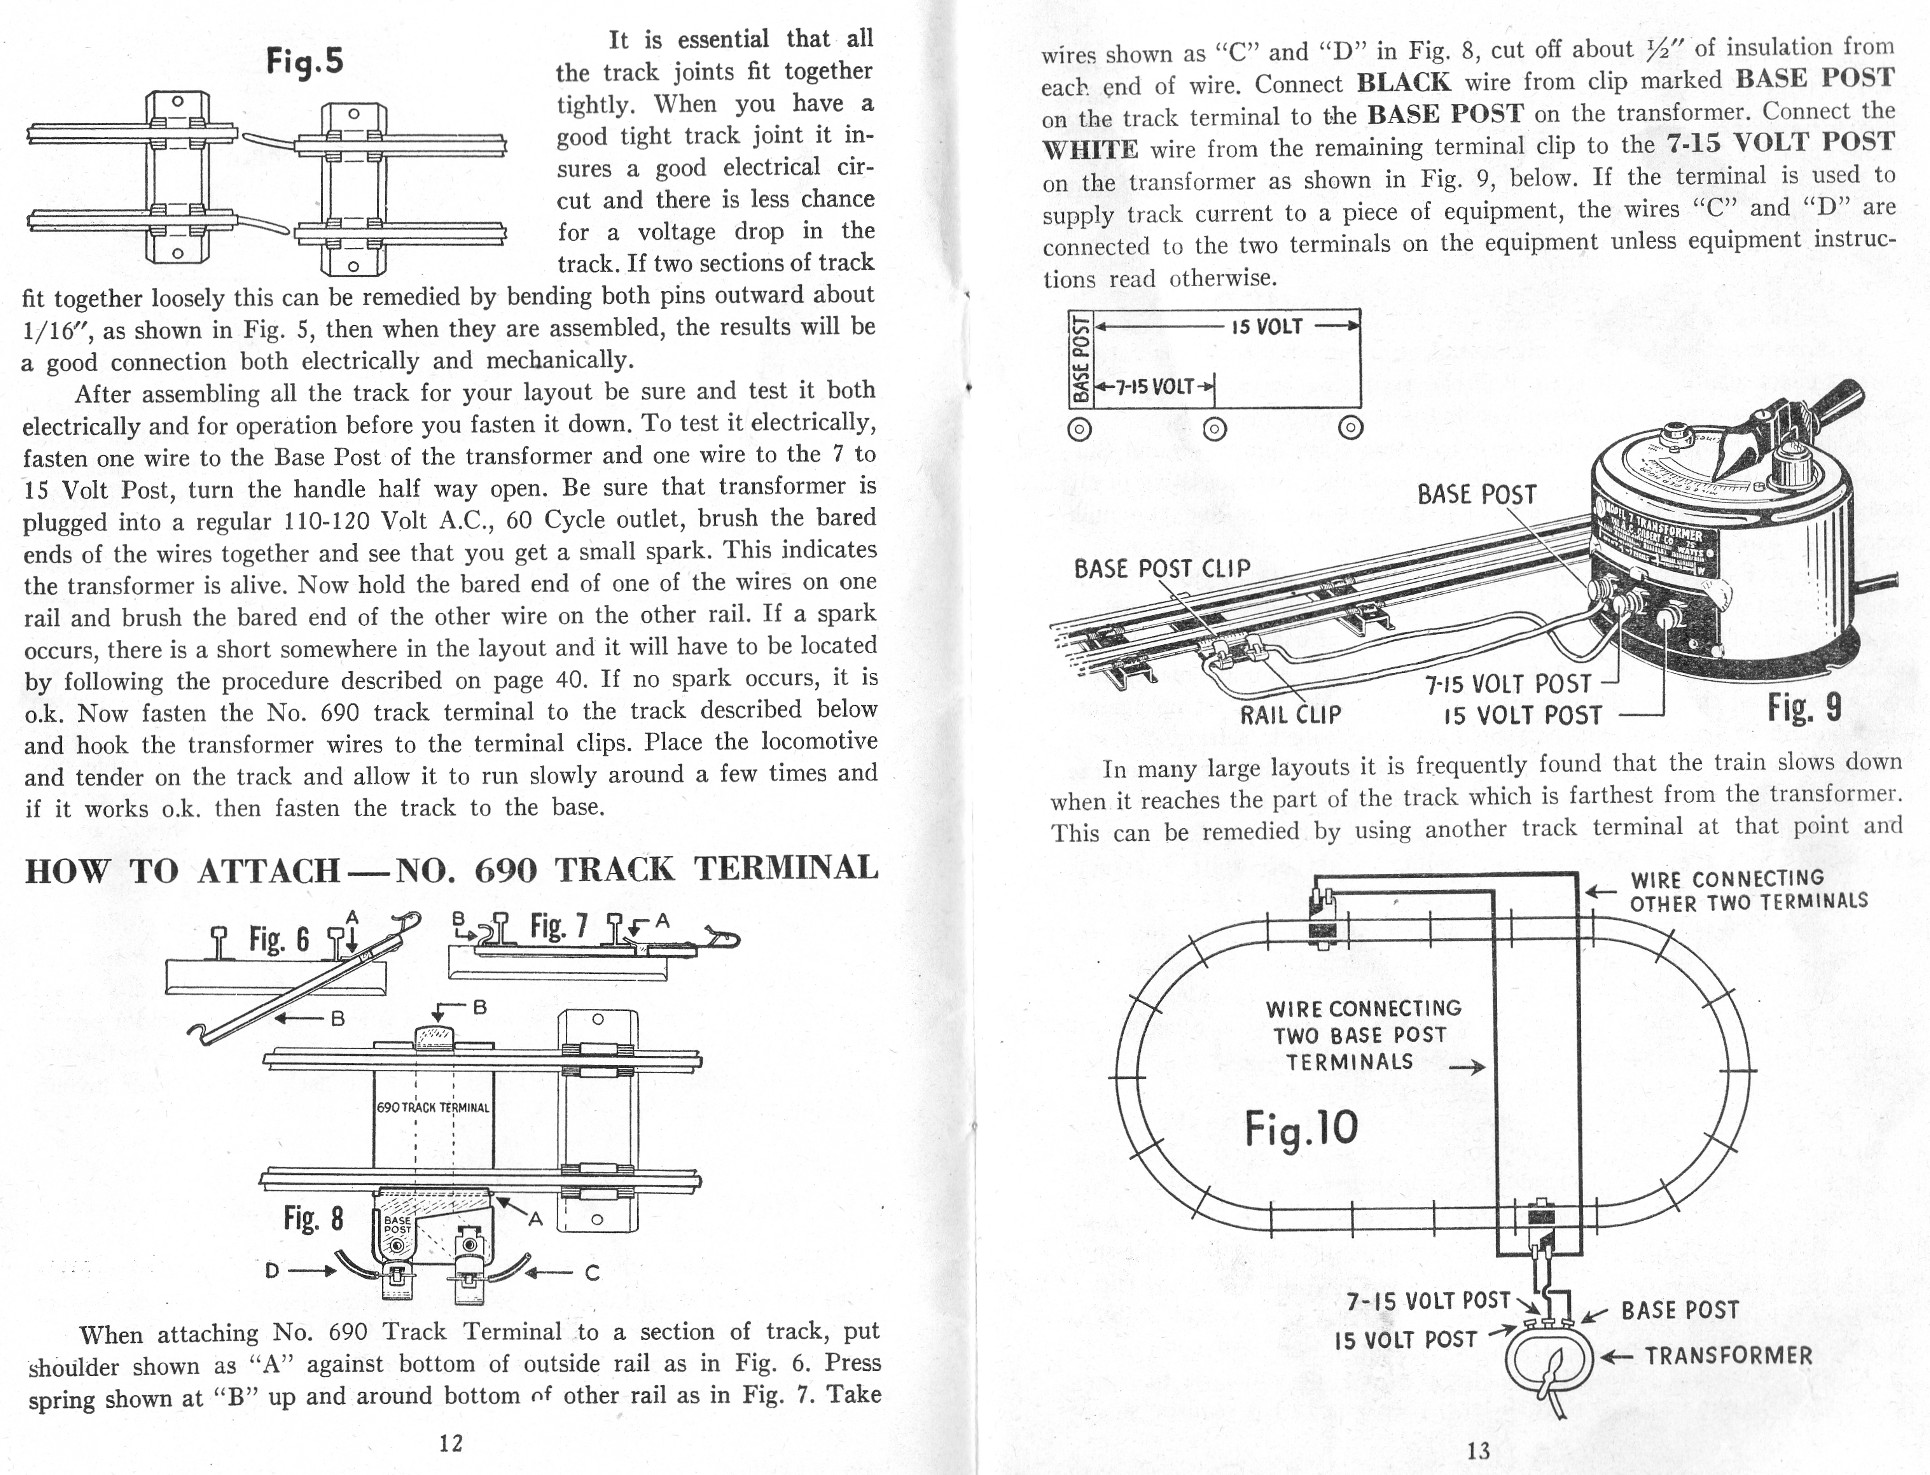 Instructions for Attaching 3/16 Scale Track Terminal No. 690 - Page 2